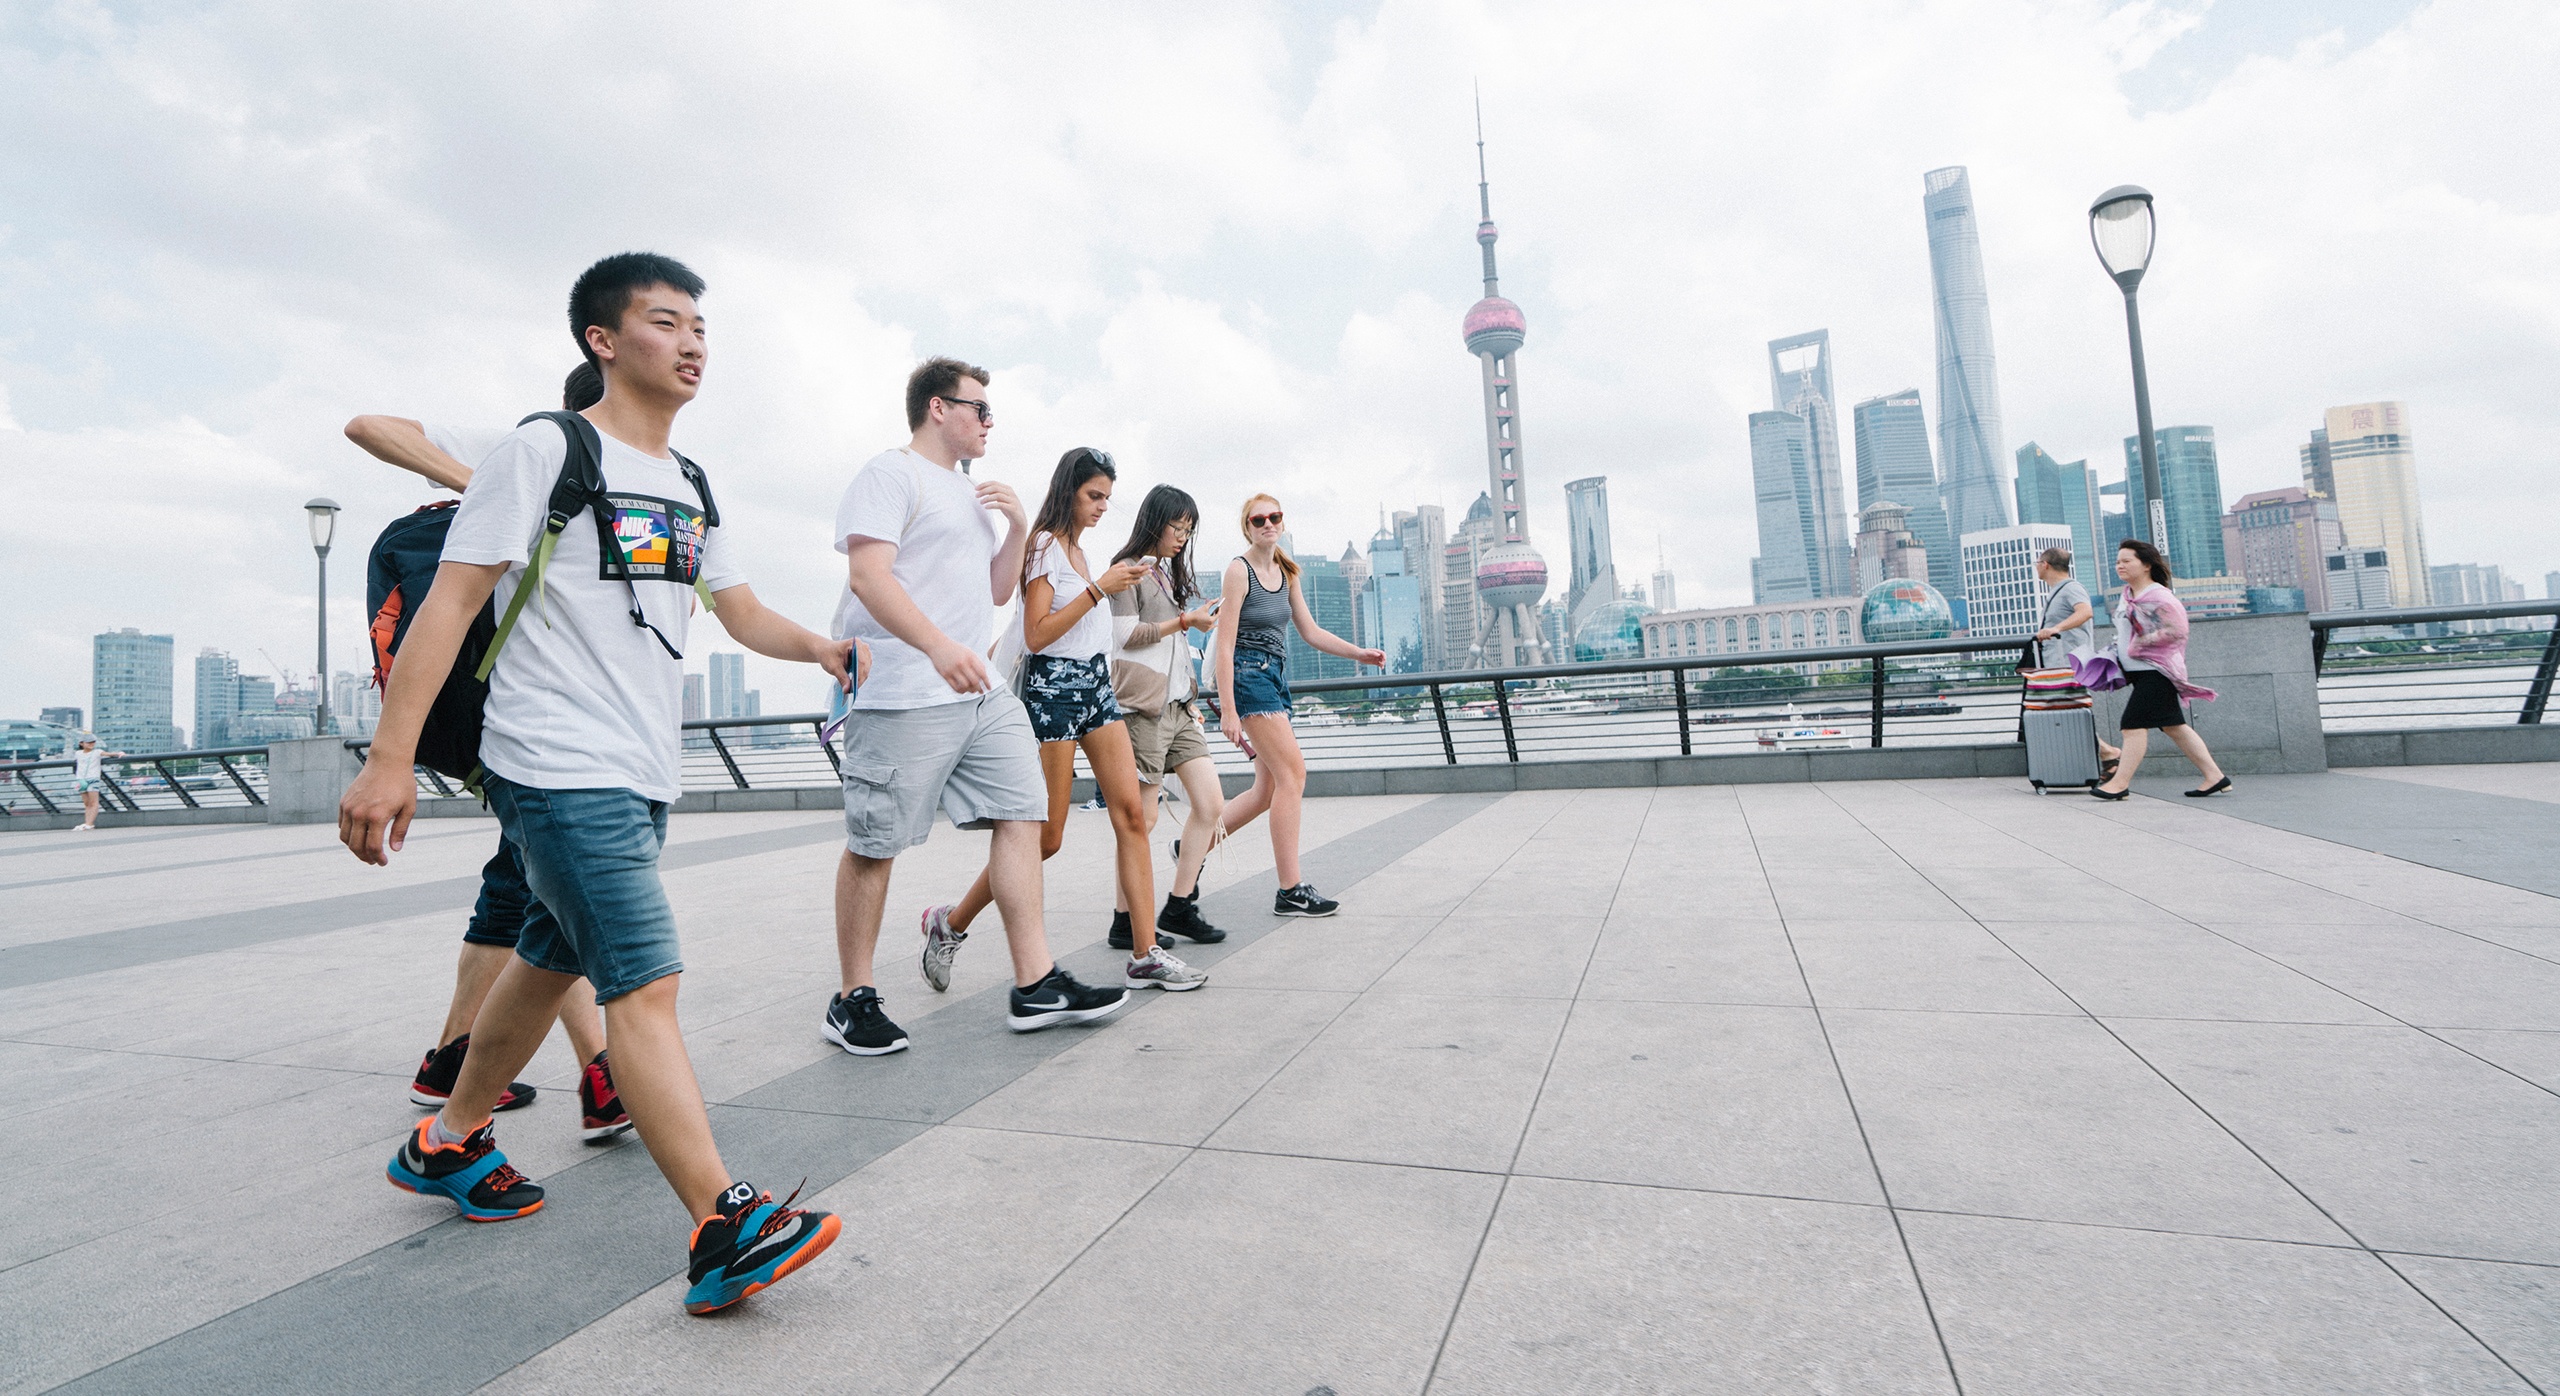 Students walking together in the city of Shanghai